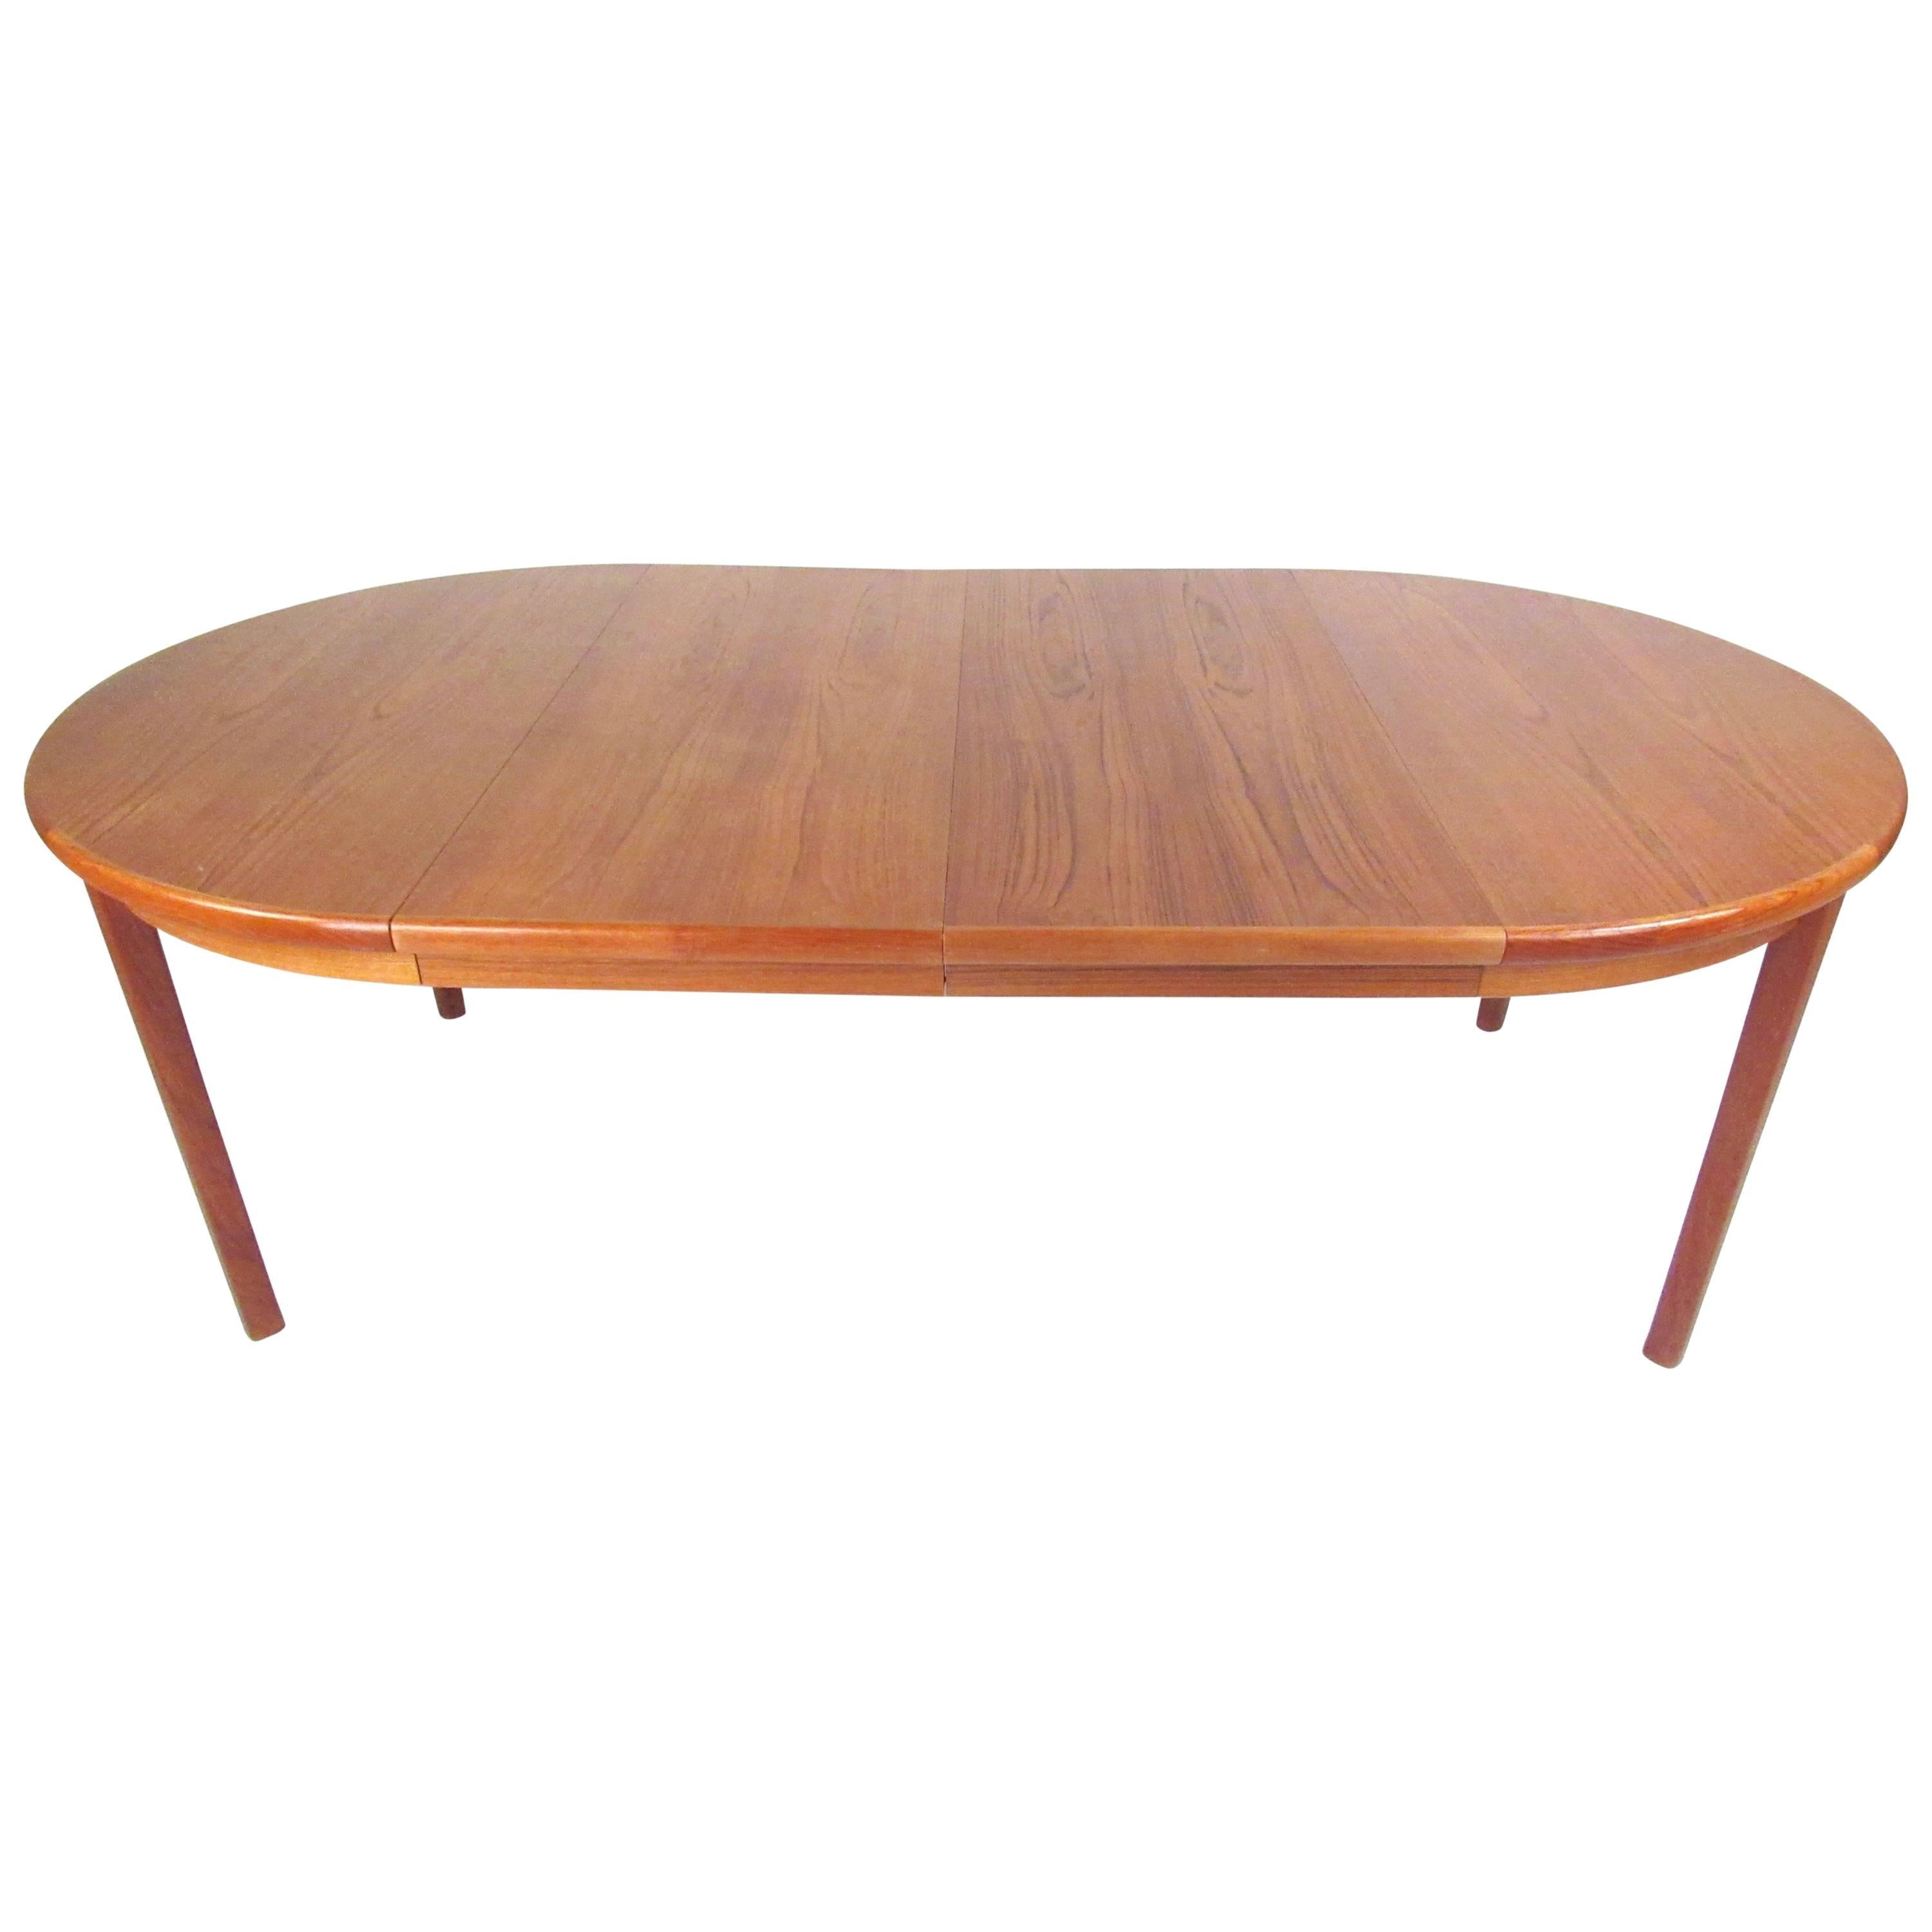 Scandinavian Modern Teak Dining Table with Two Leaves